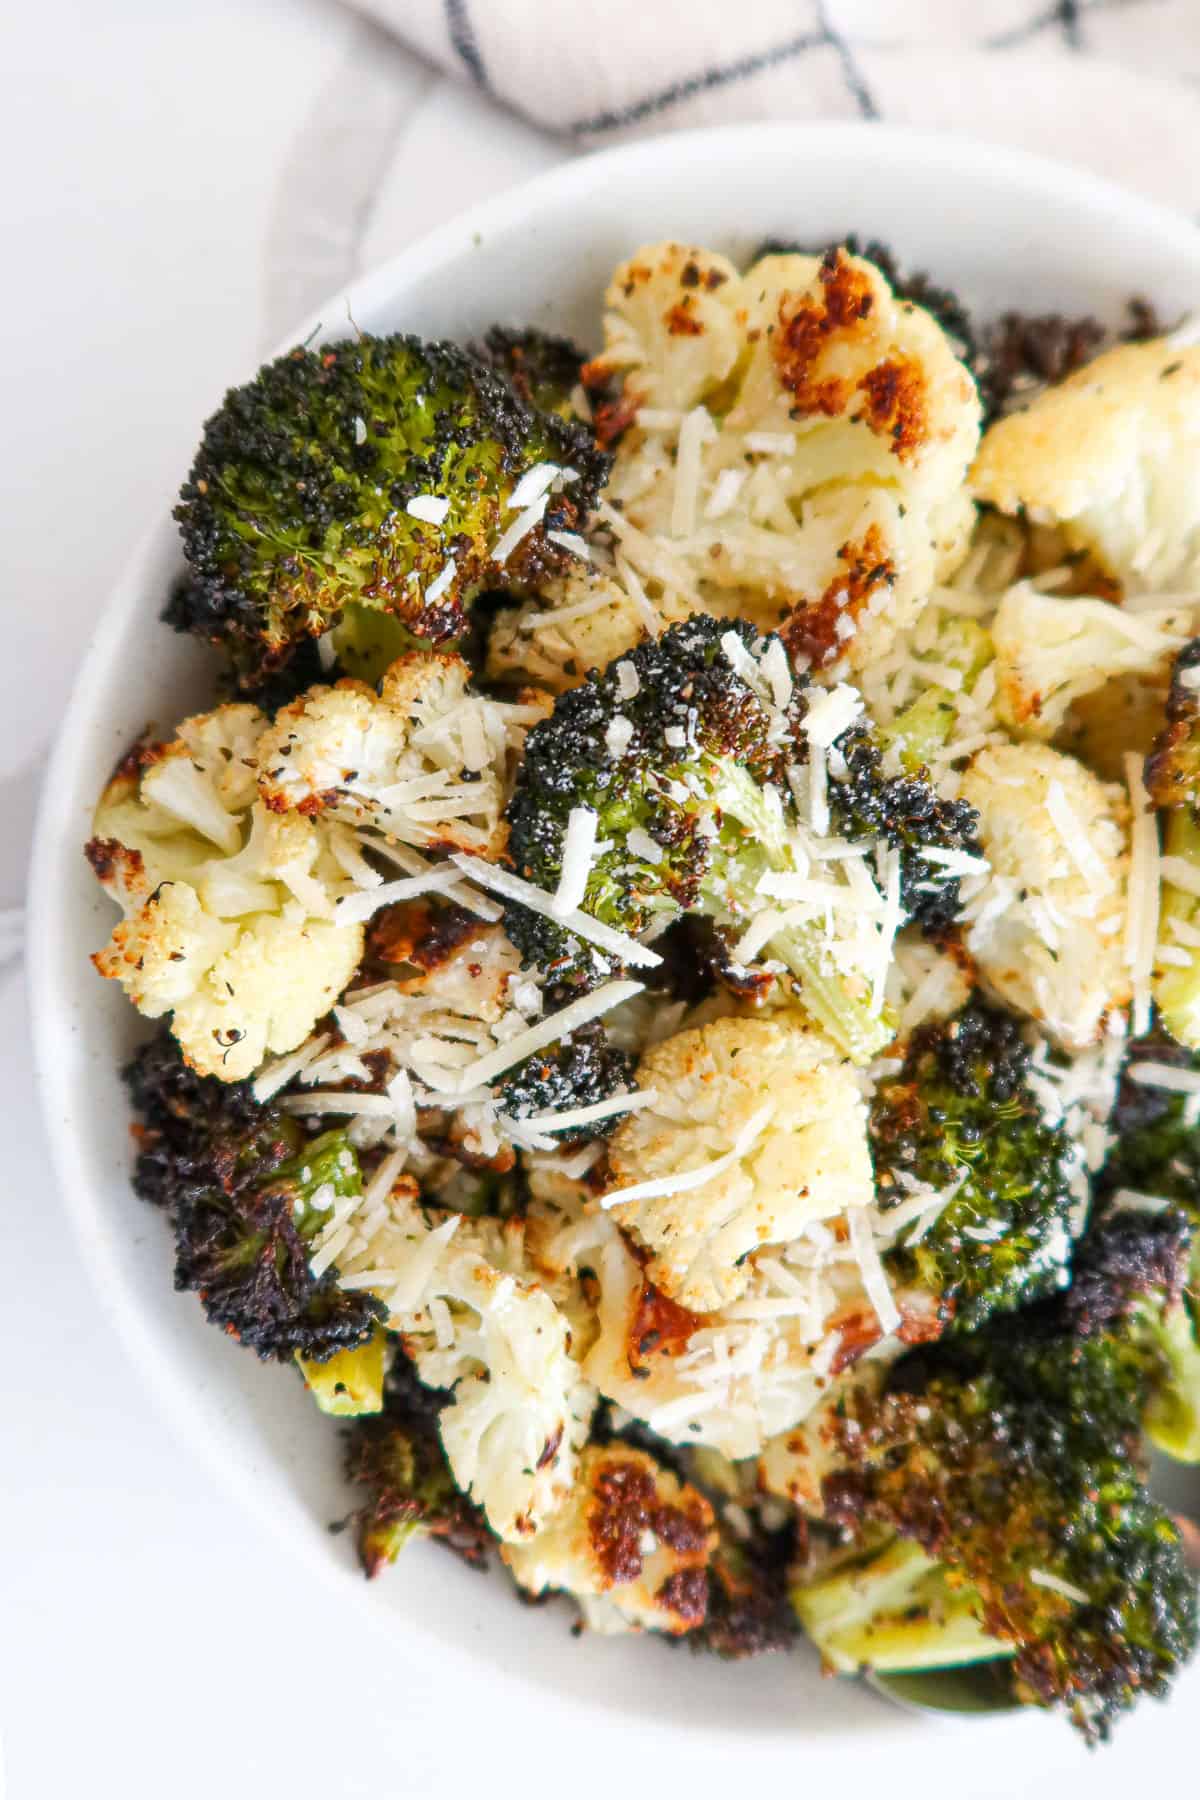 Roasted cauliflower and broccoli sprinkled with parmesan cheese.